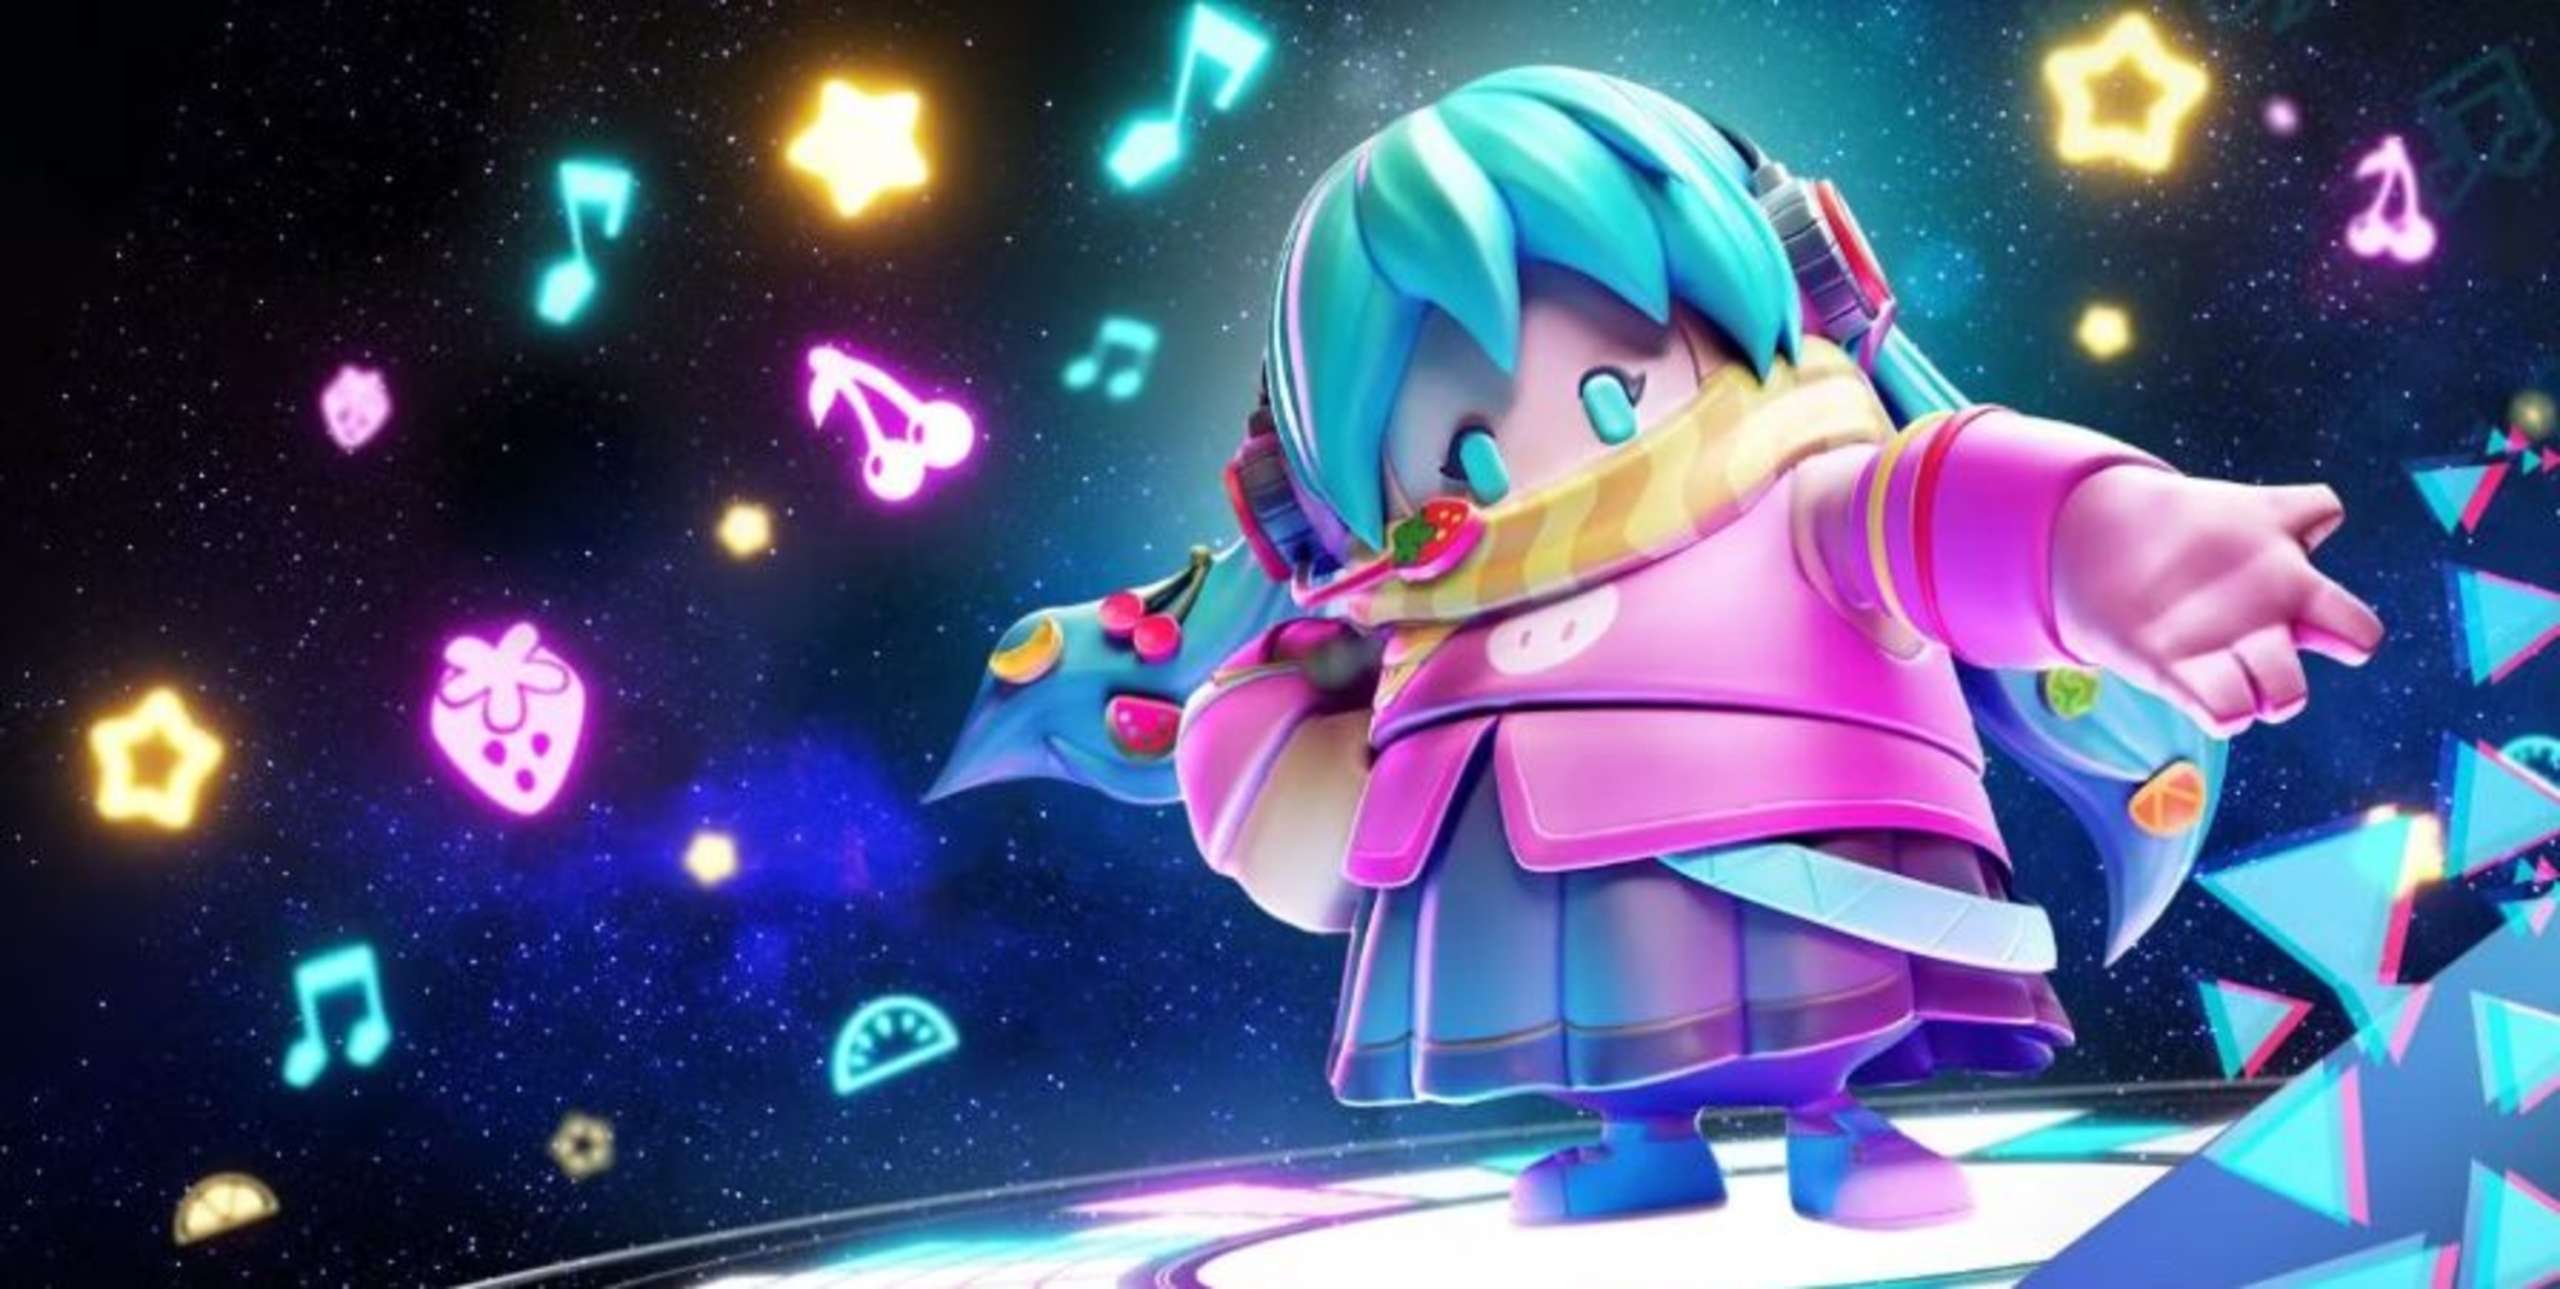 Fall Guys Season 2 Has Just Been Revealed As A Trip Into Space Called Satellite Scramble, In Which The Beans Team Up With Franchises Like Star Trek, Alien, And The Digital Character Hatsune Miku